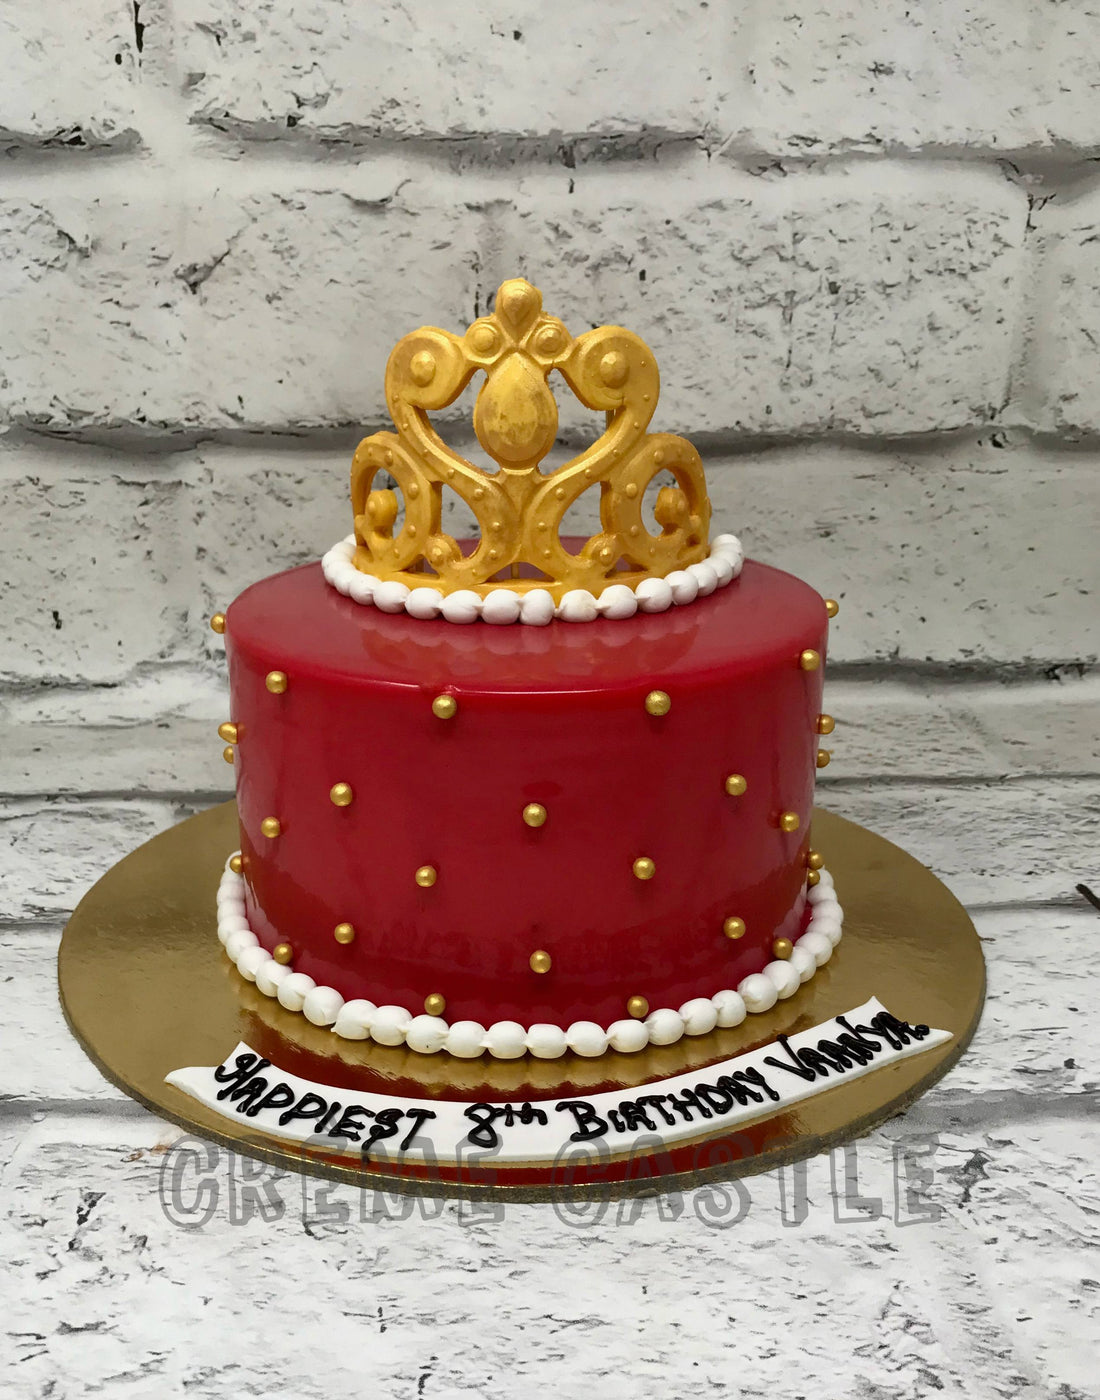 Red Crown Cake